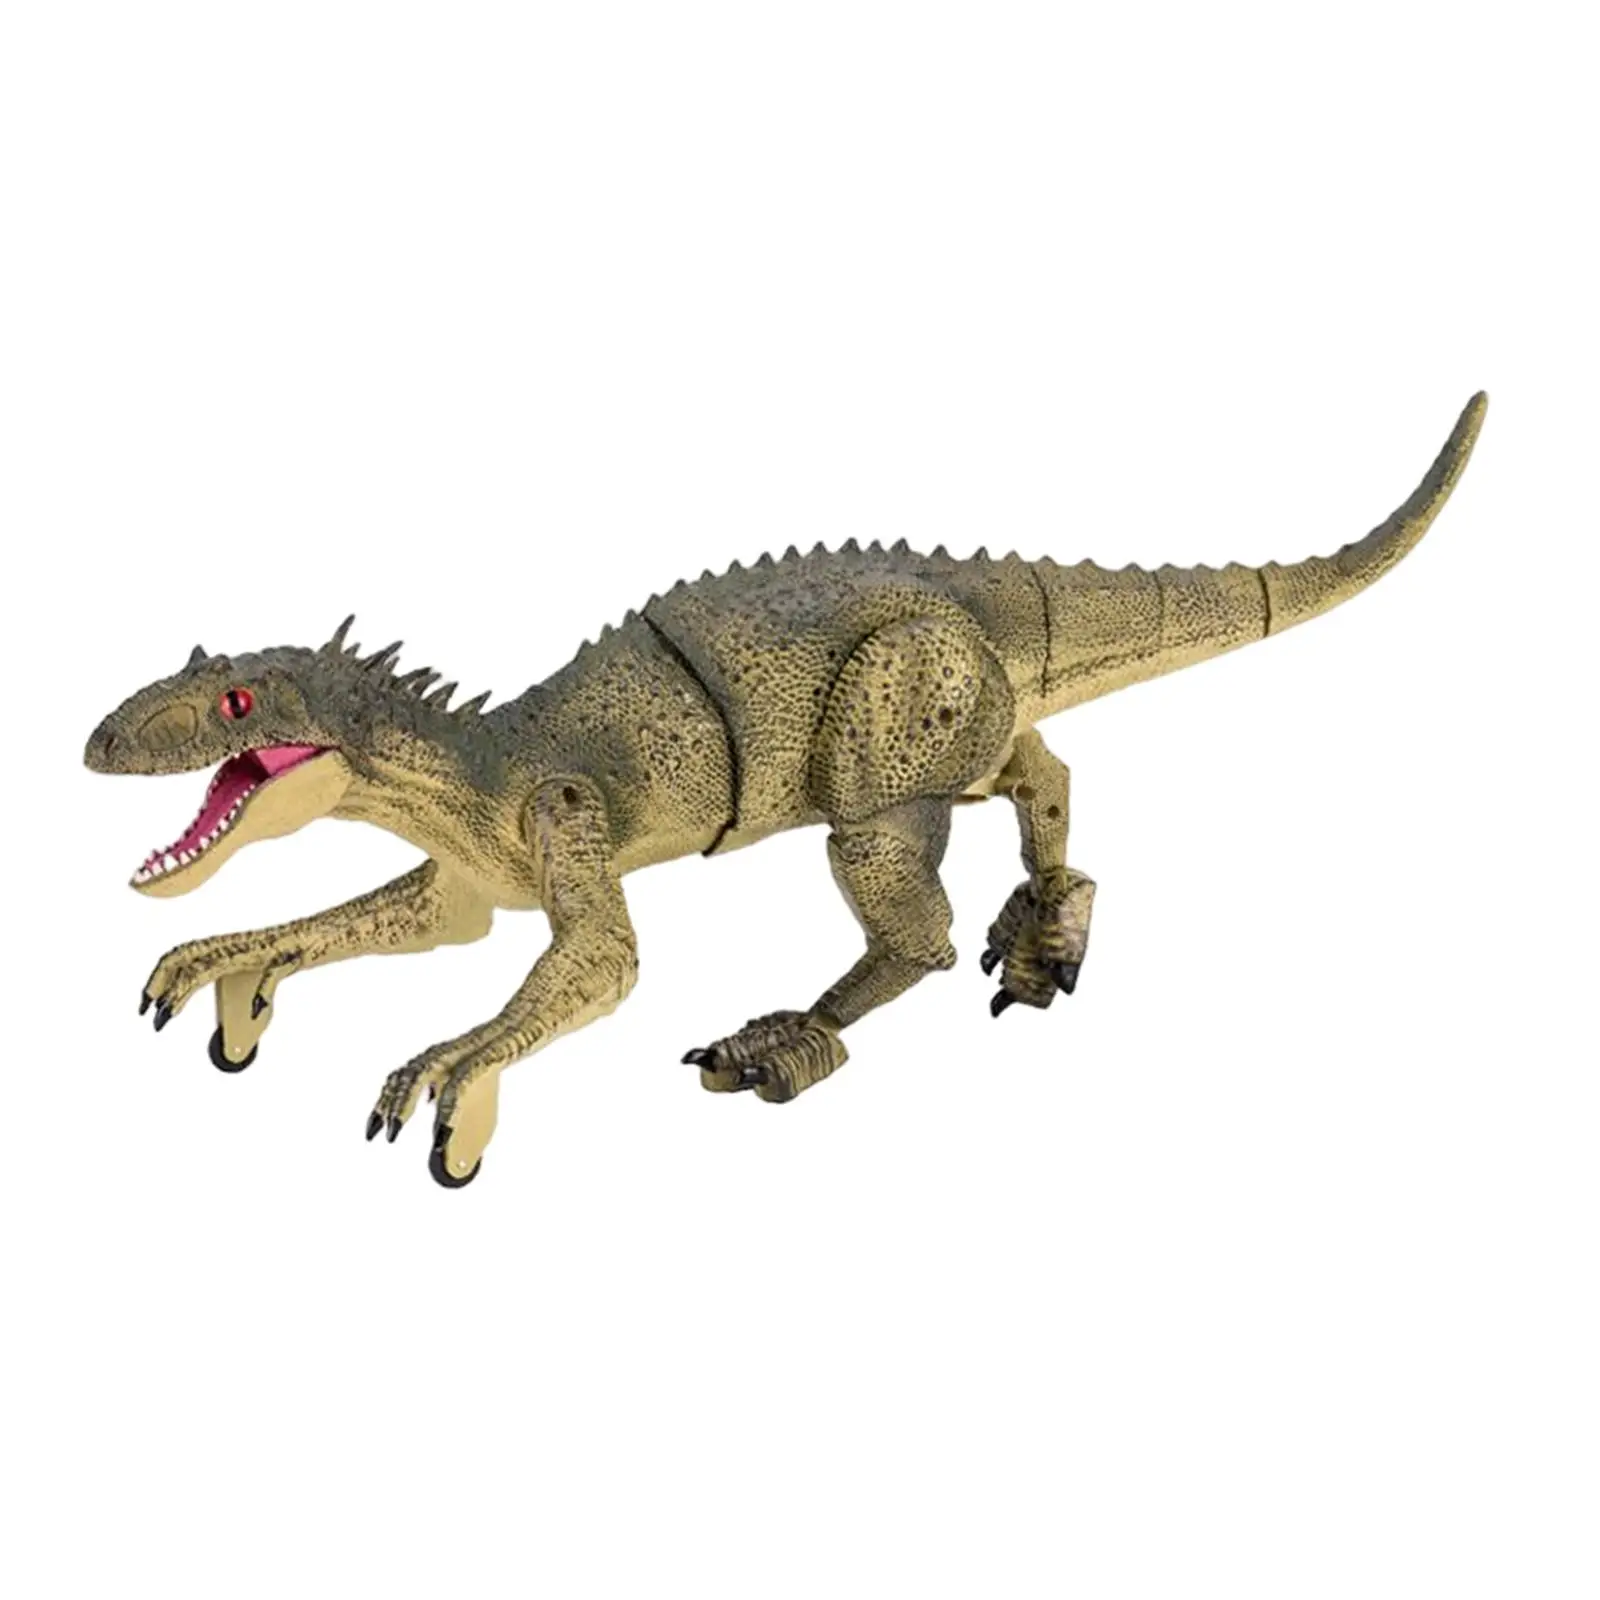 2.4G Dinosaur Toy Realistic with Light Multifunction Intelligent RC Walking Dinosaur Remote Control for Children Boys Girls Gift